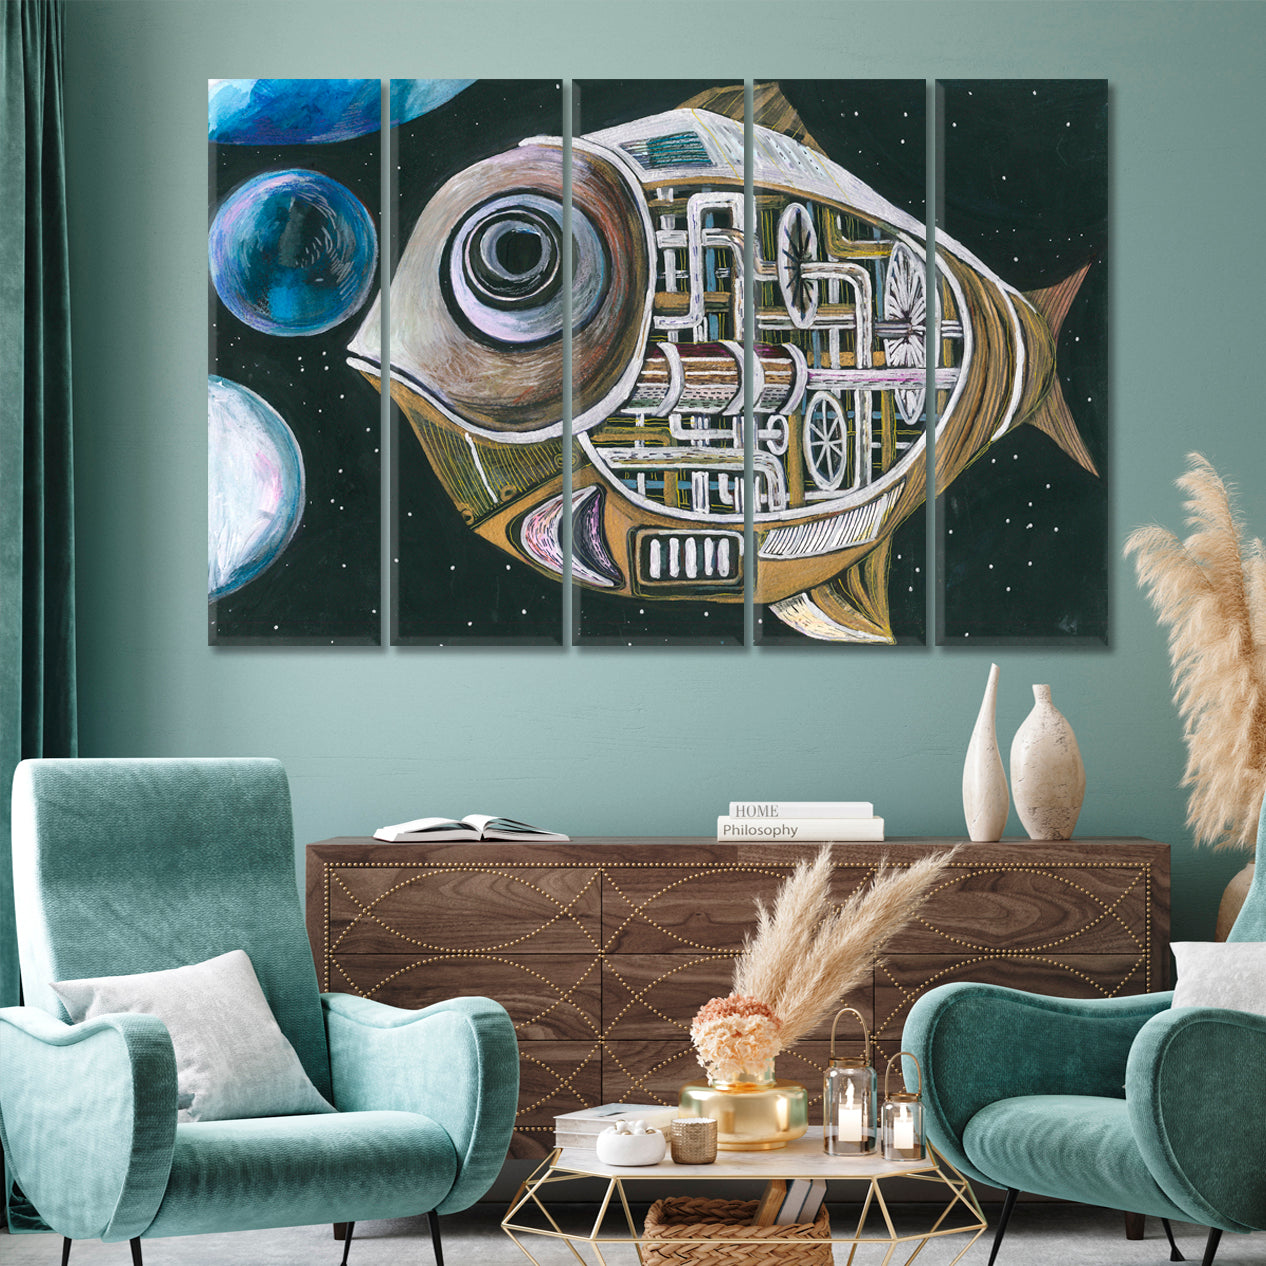 Big Space Mechanical Fish Surreal Abstract Steampunk Style Contemporary Art Artesty 5 panels 36" x 24" 